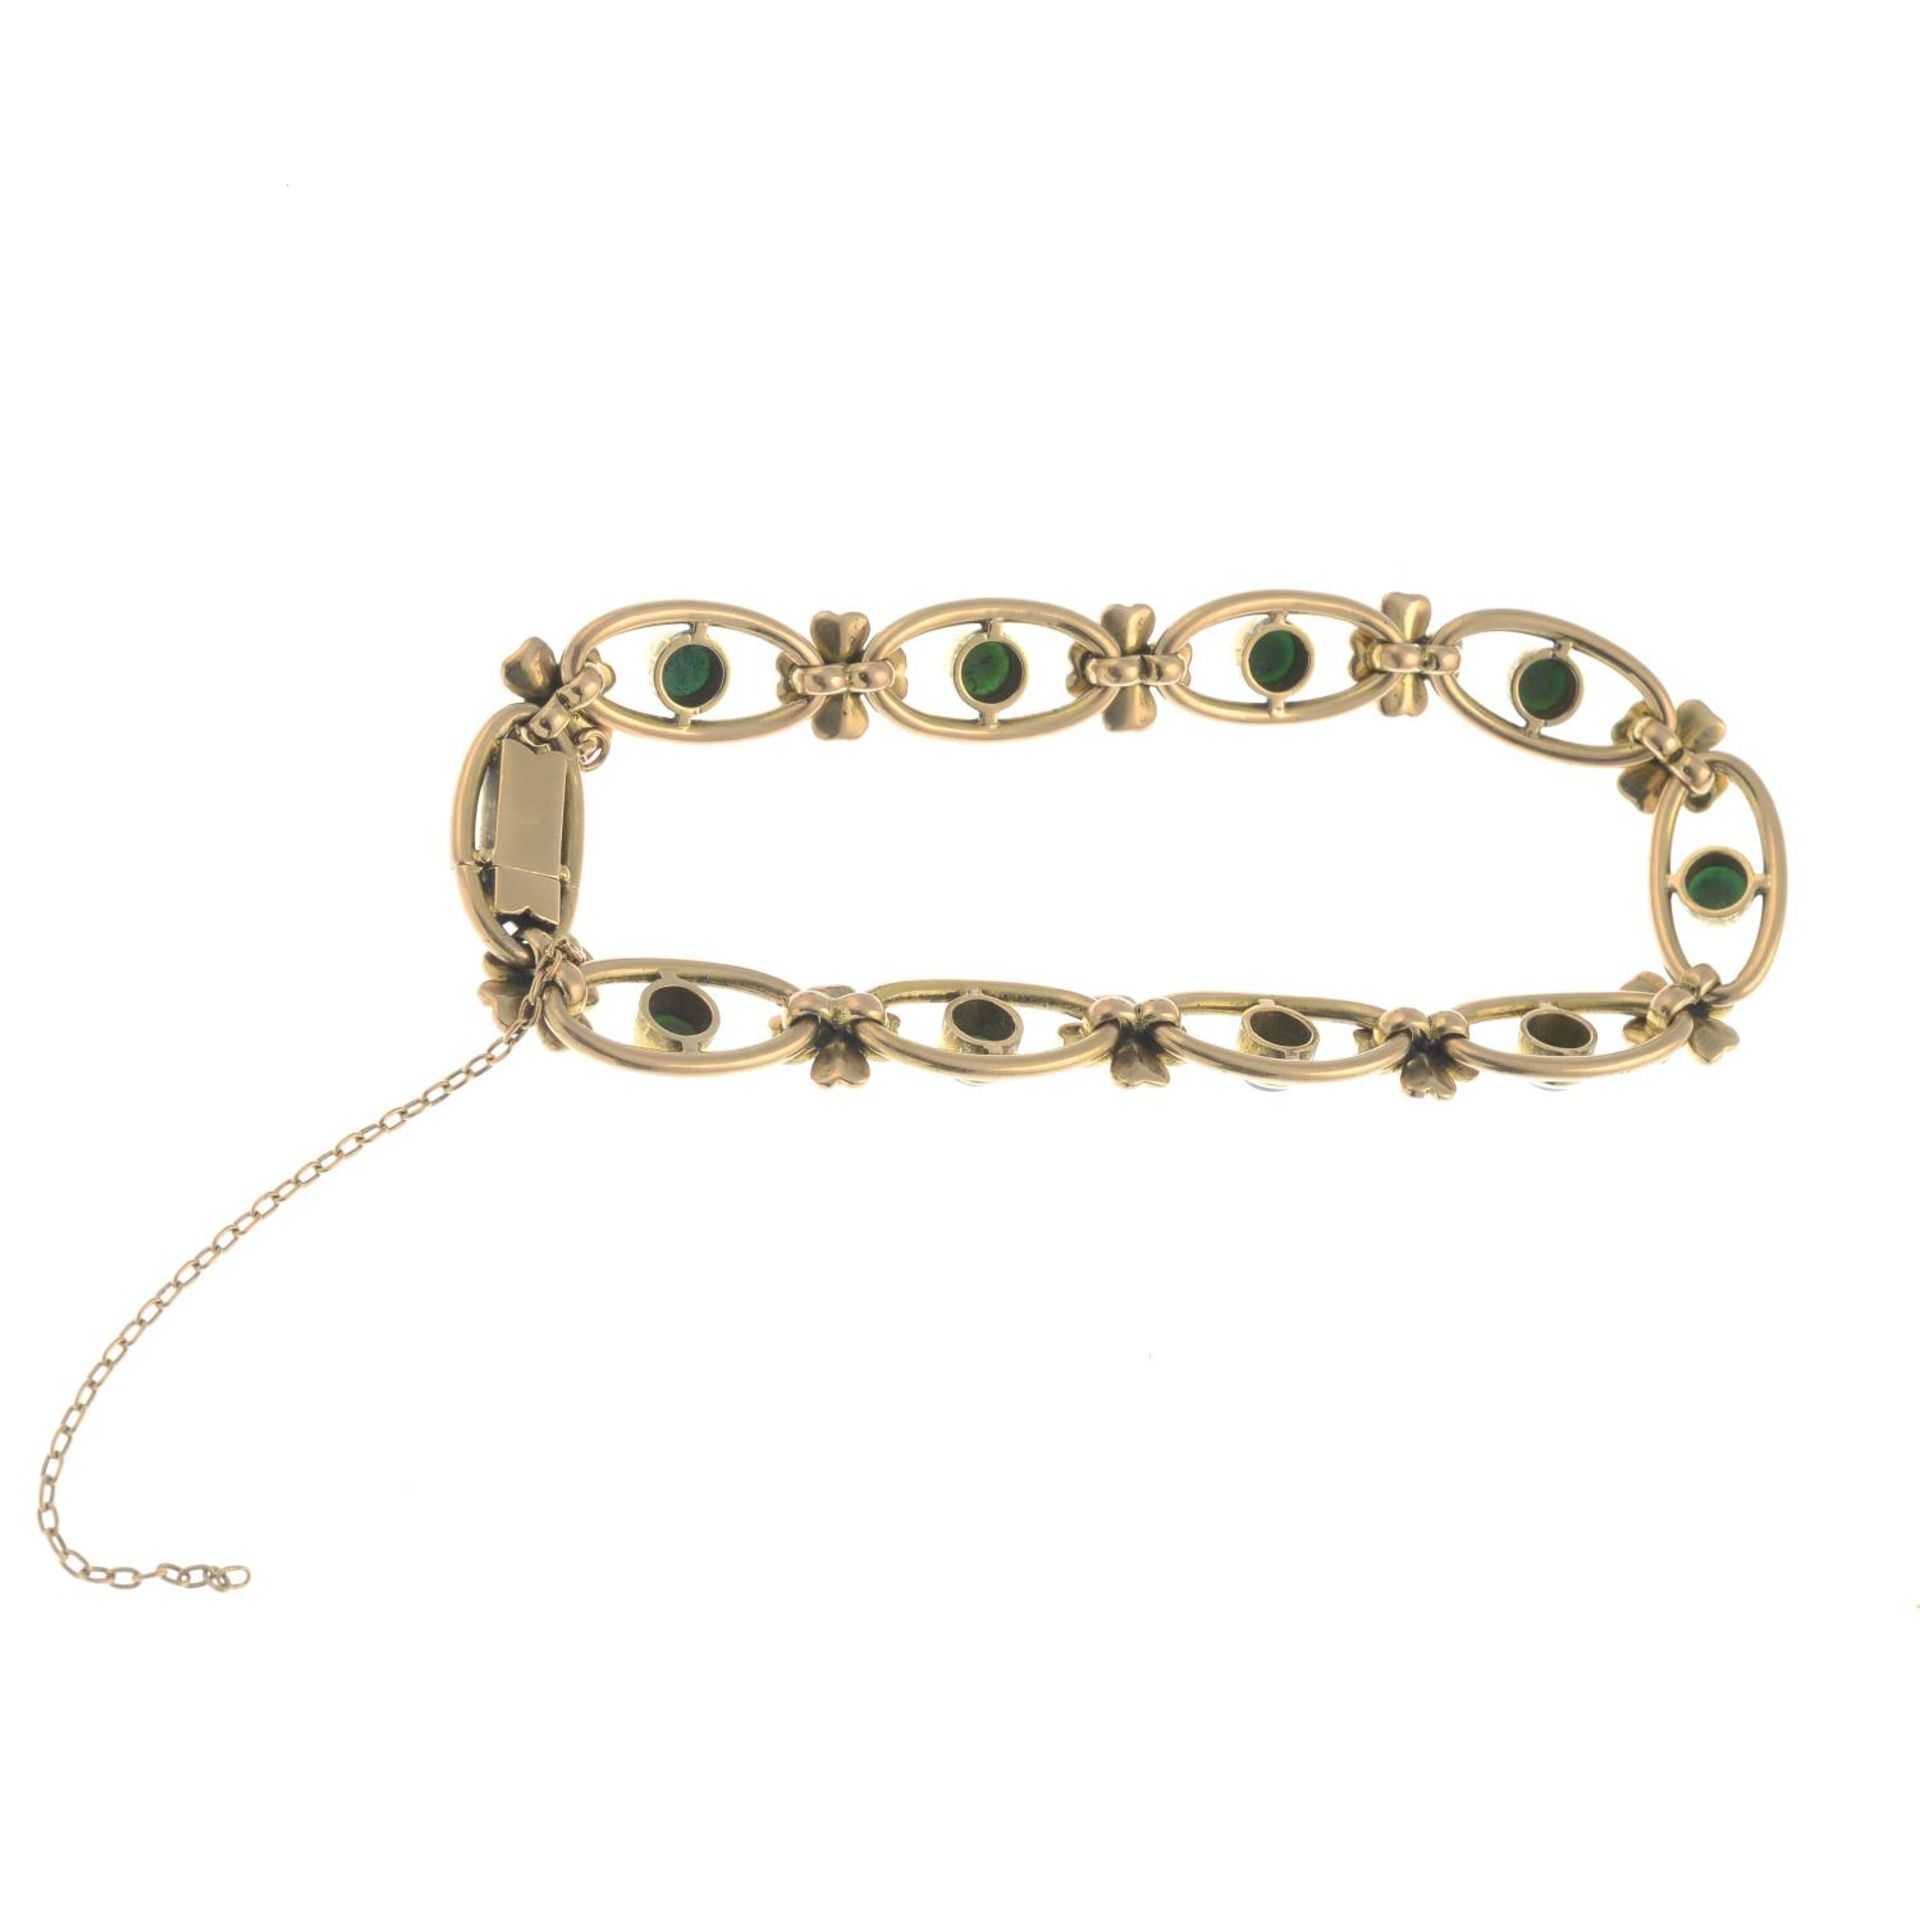 An early 20th century 15ct gold turquoise floral bracelet. - Image 2 of 2